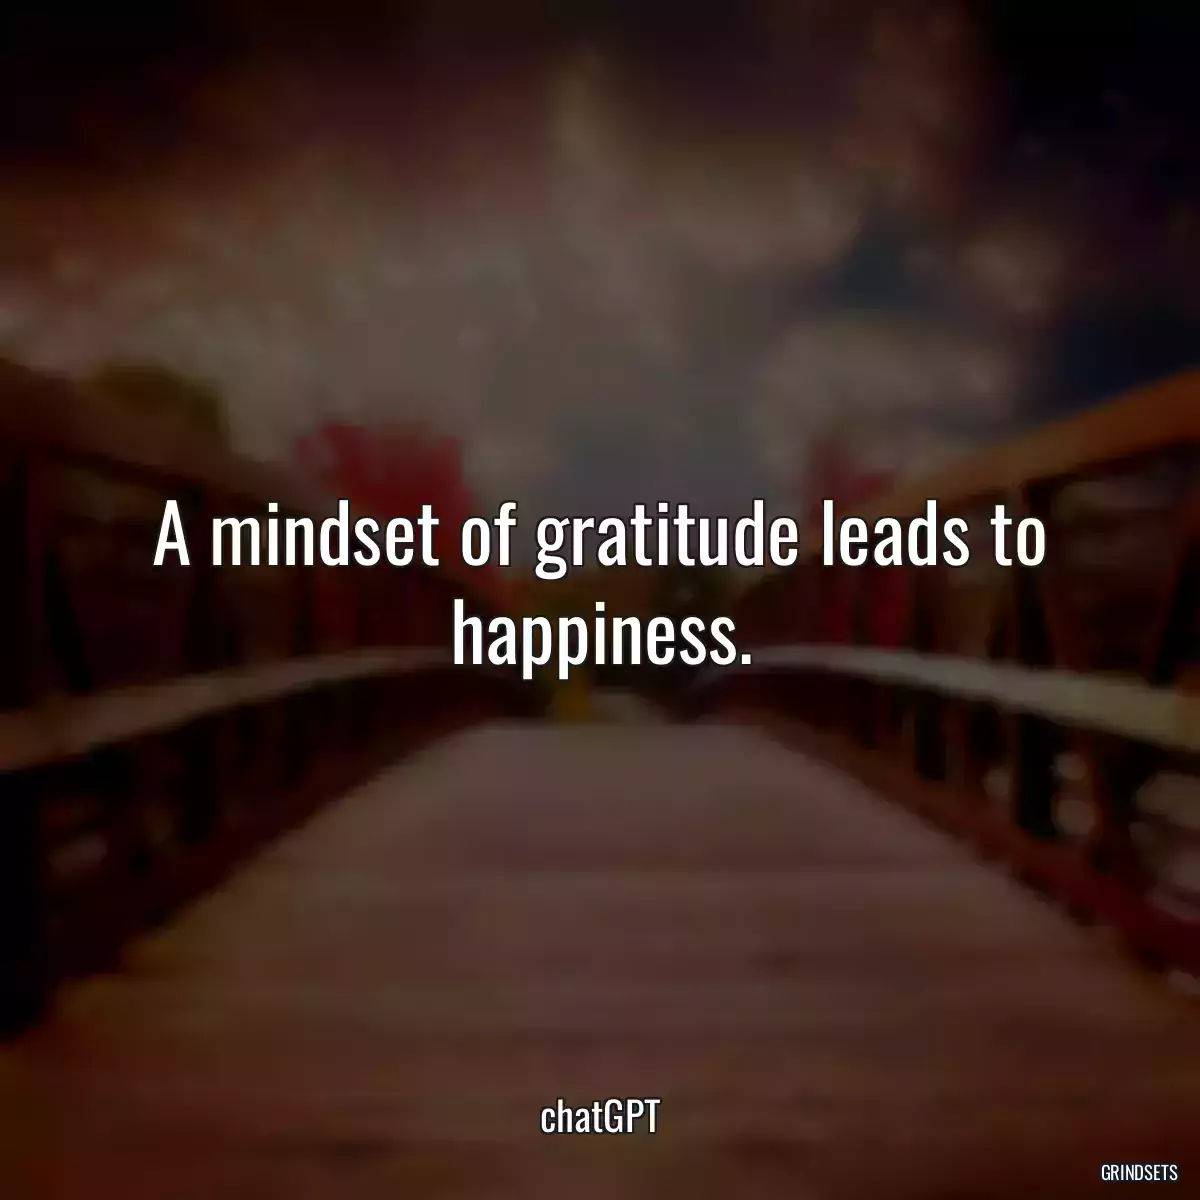 A mindset of gratitude leads to happiness.